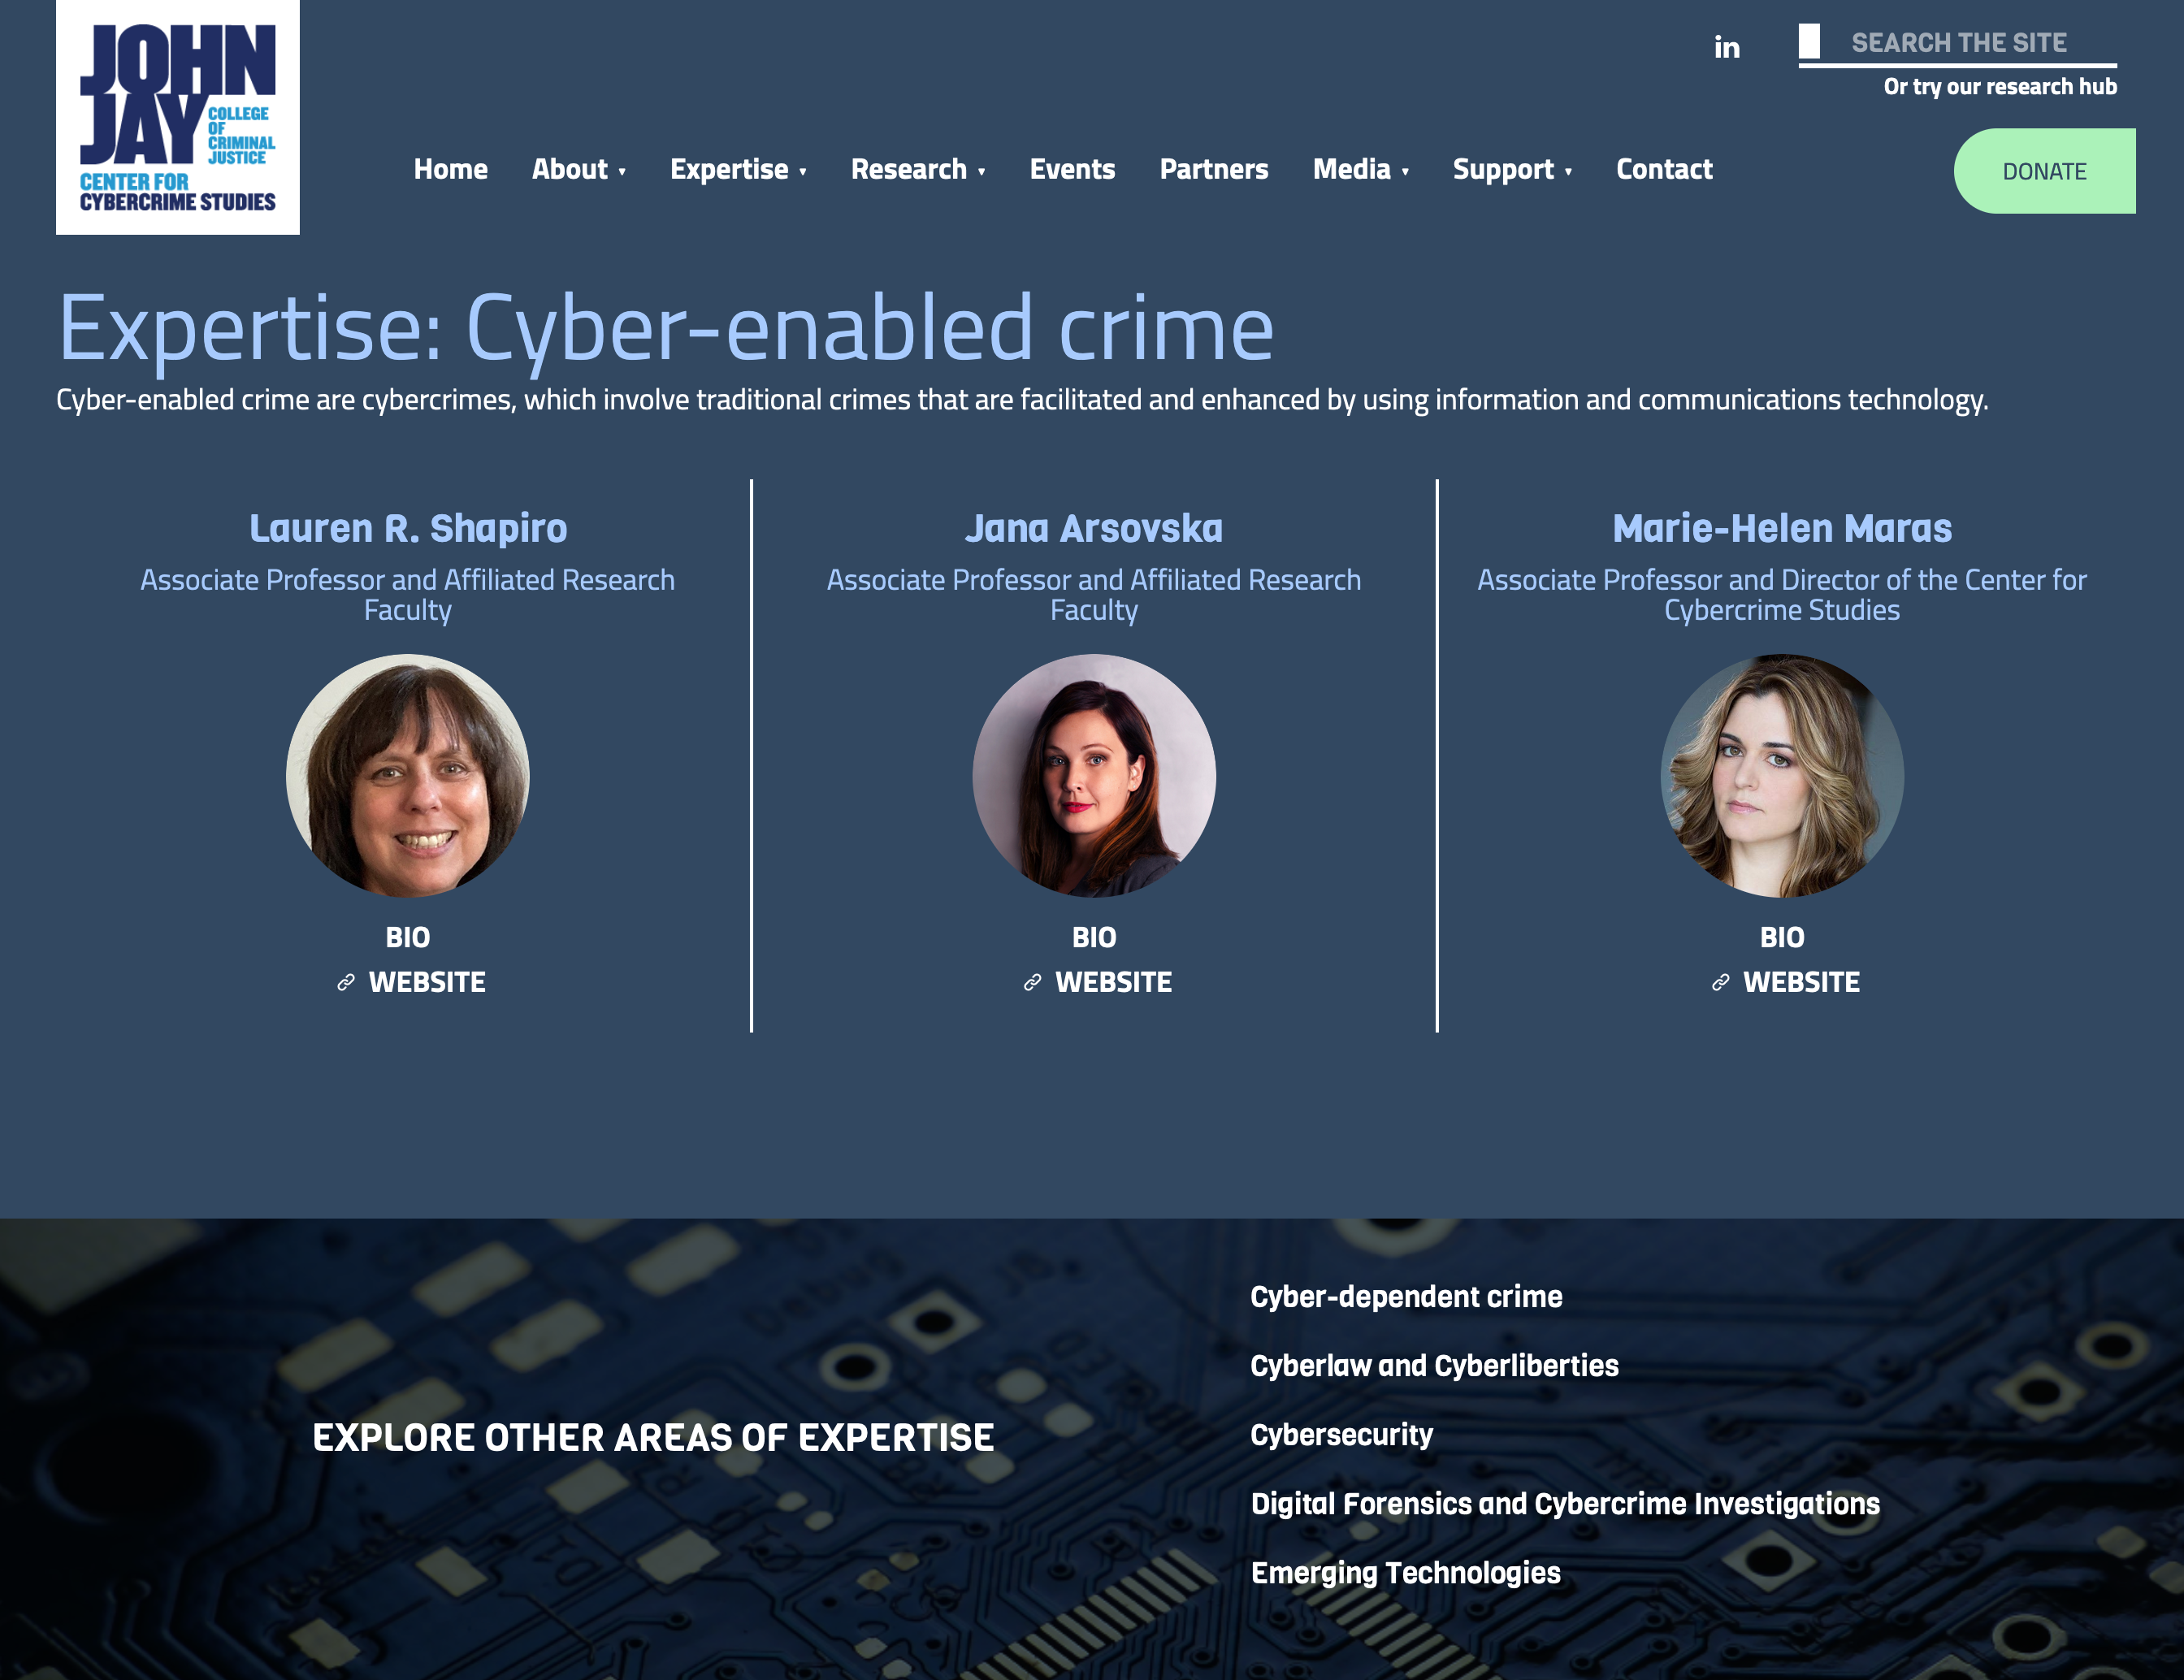 Center for Cybercrime Studies at CUNY John Jay College of Criminal Justice: Expertise UX